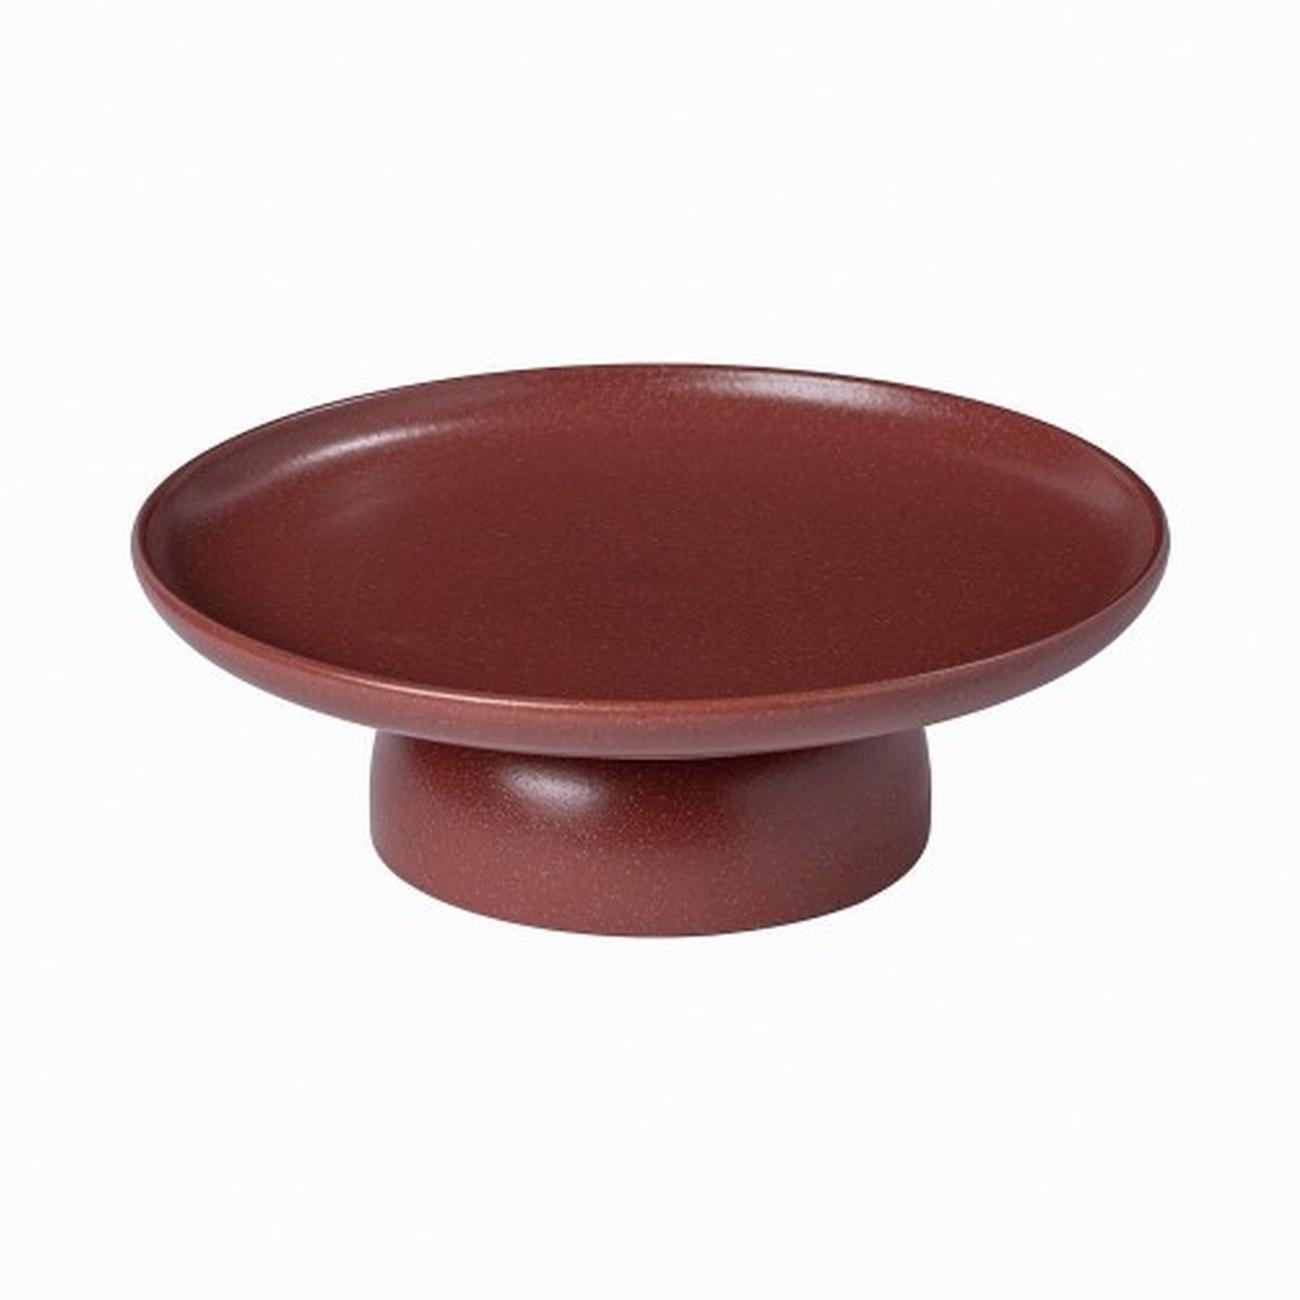 casafina-pacifica-cayenne-footed-plate-27cm - Casafina Pacifica Cayenne Footed Plate 27cm